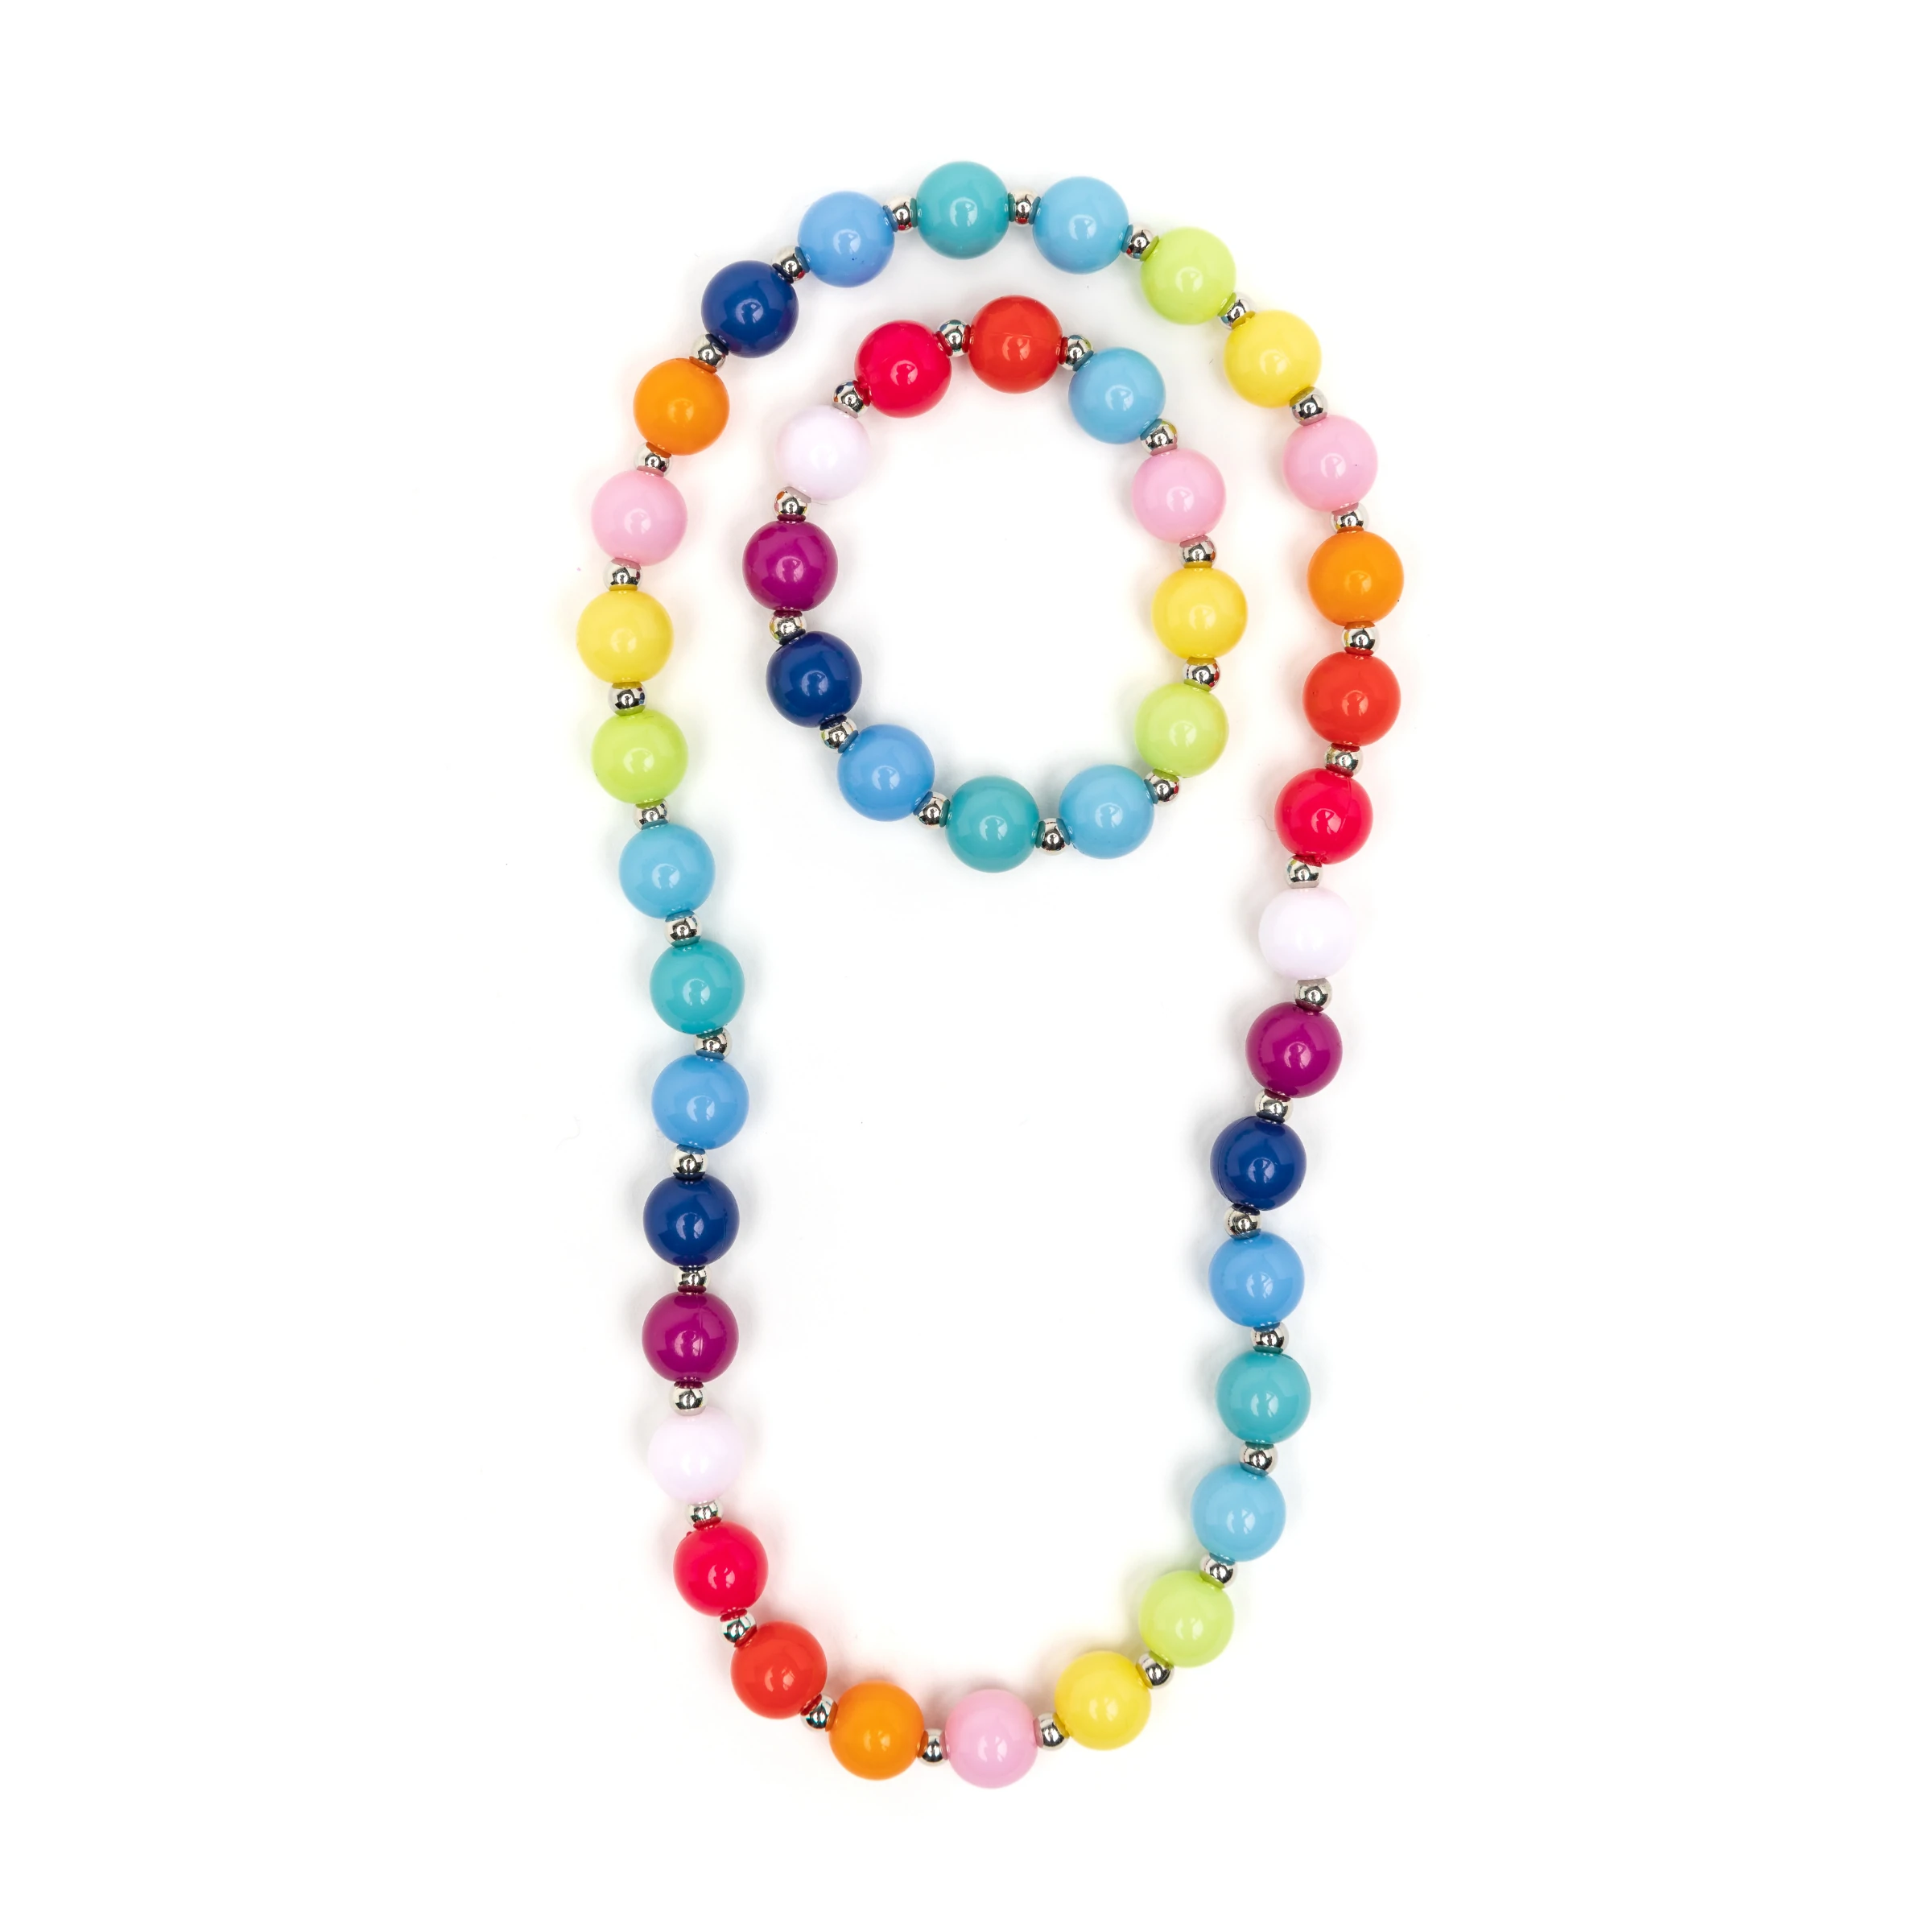 Children Girls Toy DIY Bracelet Making Set Spacer Beads Pendant Accessories  for Bracelet Necklace Jewelry Making Christmas Gifts